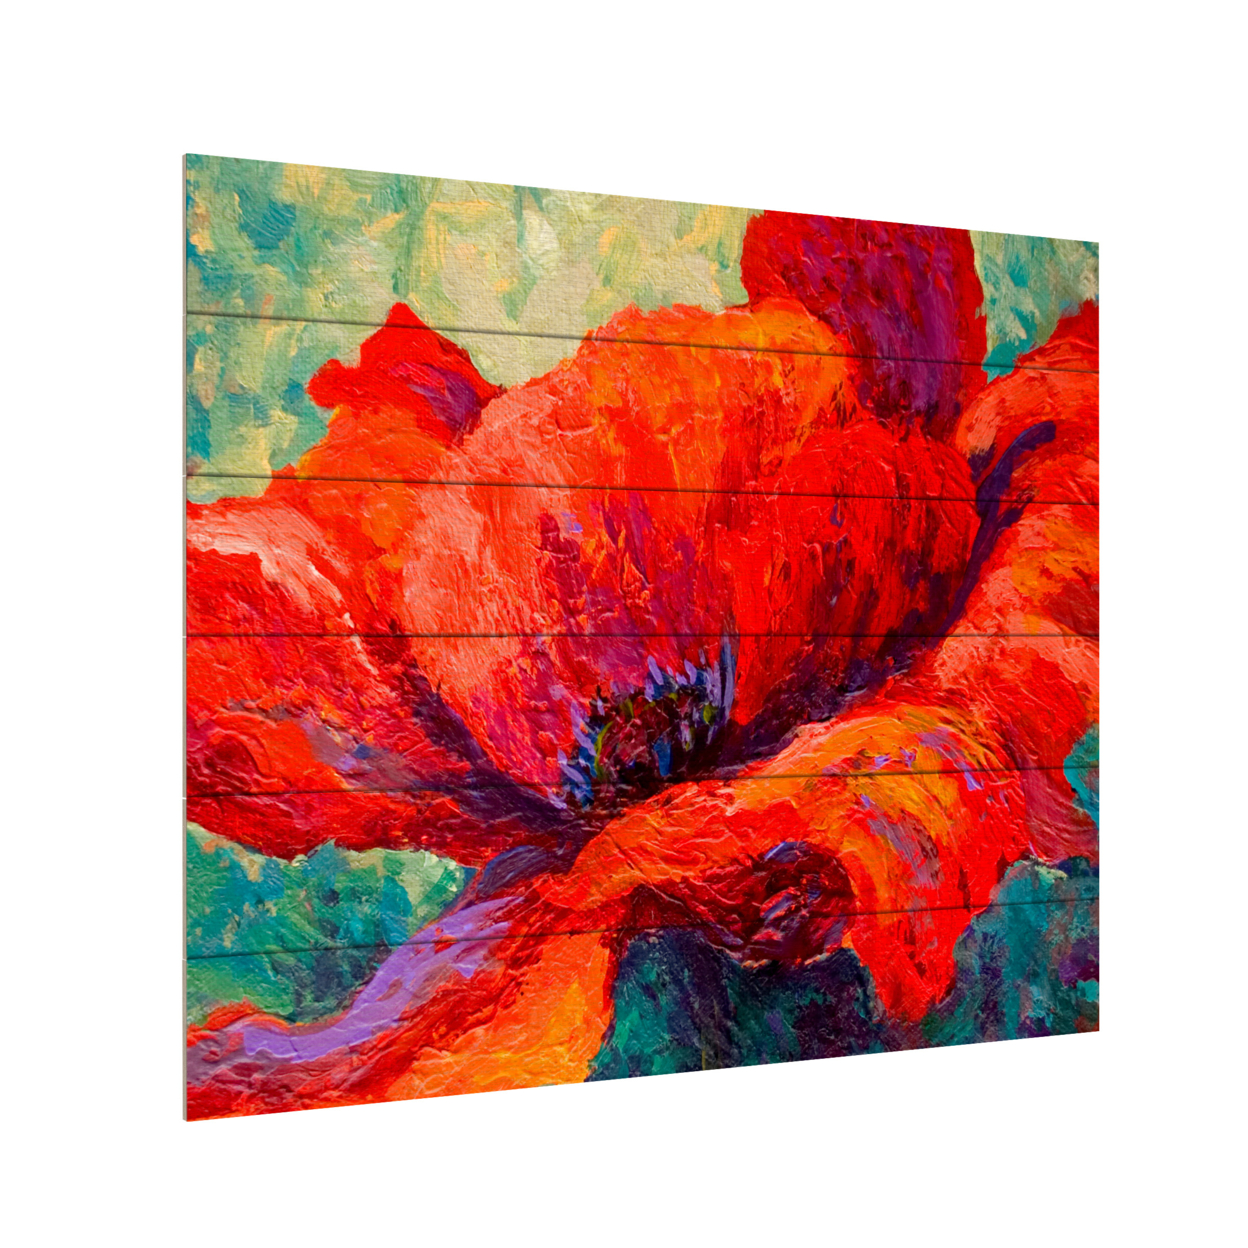 Wooden Slat Art 18 X 22 Inches Titled Red Poppy III Ready To Hang Home Decor Picture